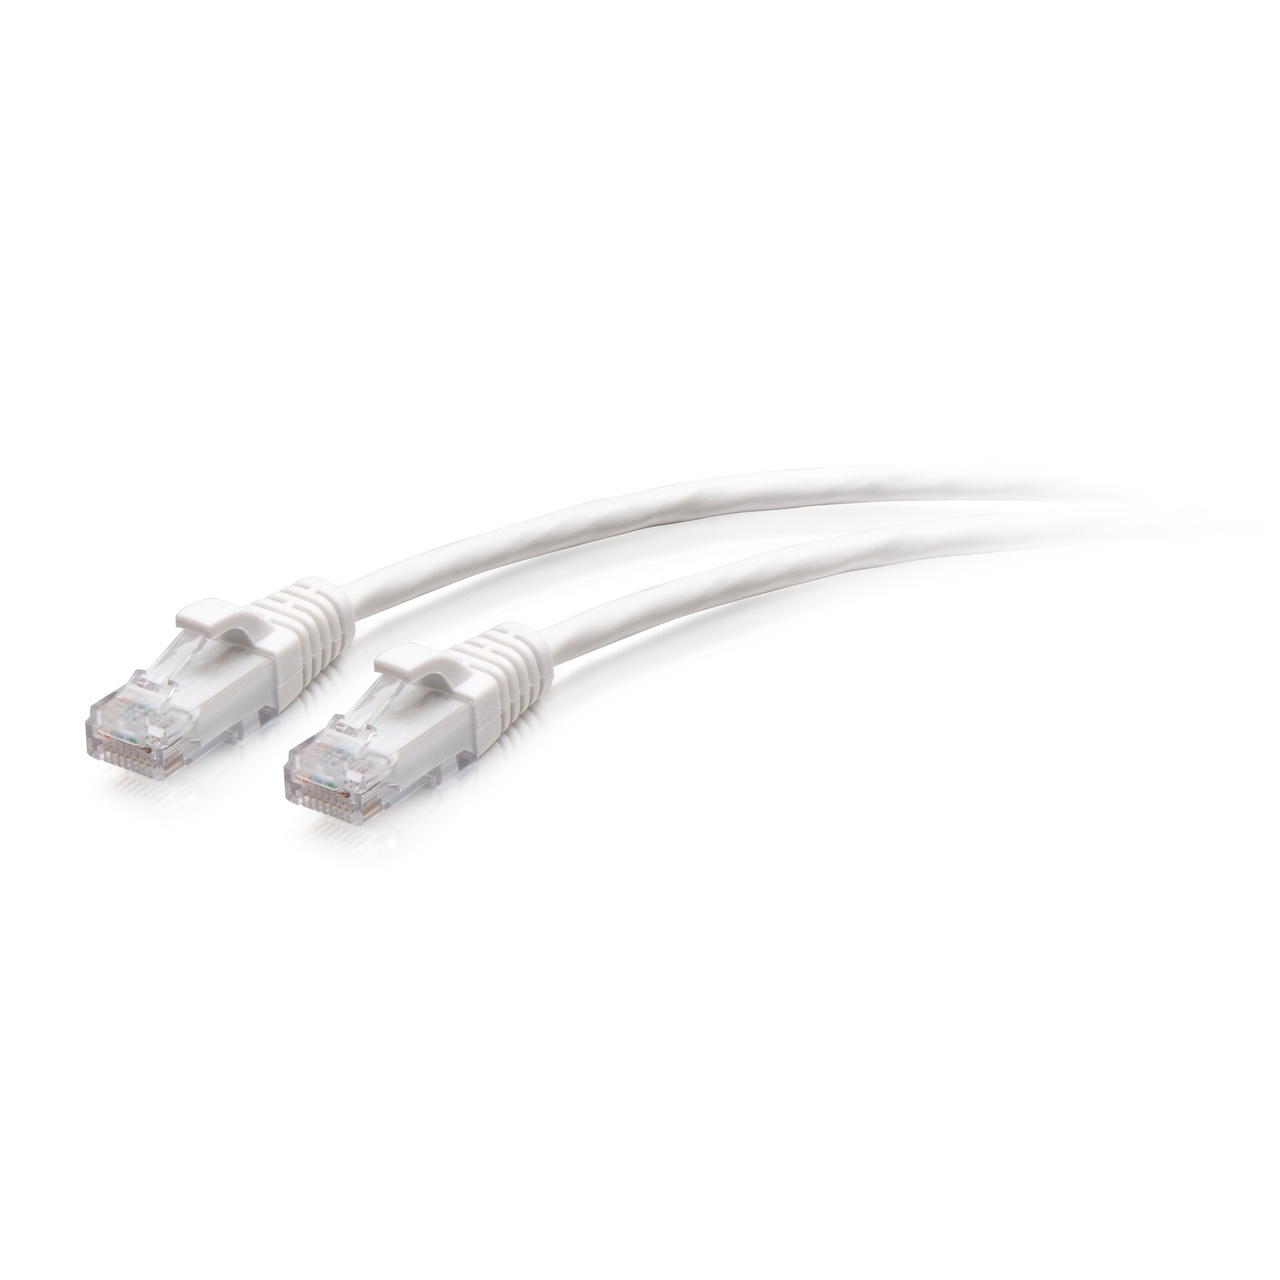 C2G 3ft (0.9m) Cat6a Snagless Unshielded (UTP) Slim Ethernet Network Patch Cable - White - Patch Cable - RJ-45 (M) To RJ-45 (M) - 90 Cm - 4.8 Mm - UTP - CAT 6a - Molded, Snagless - White C2G3 - C2000